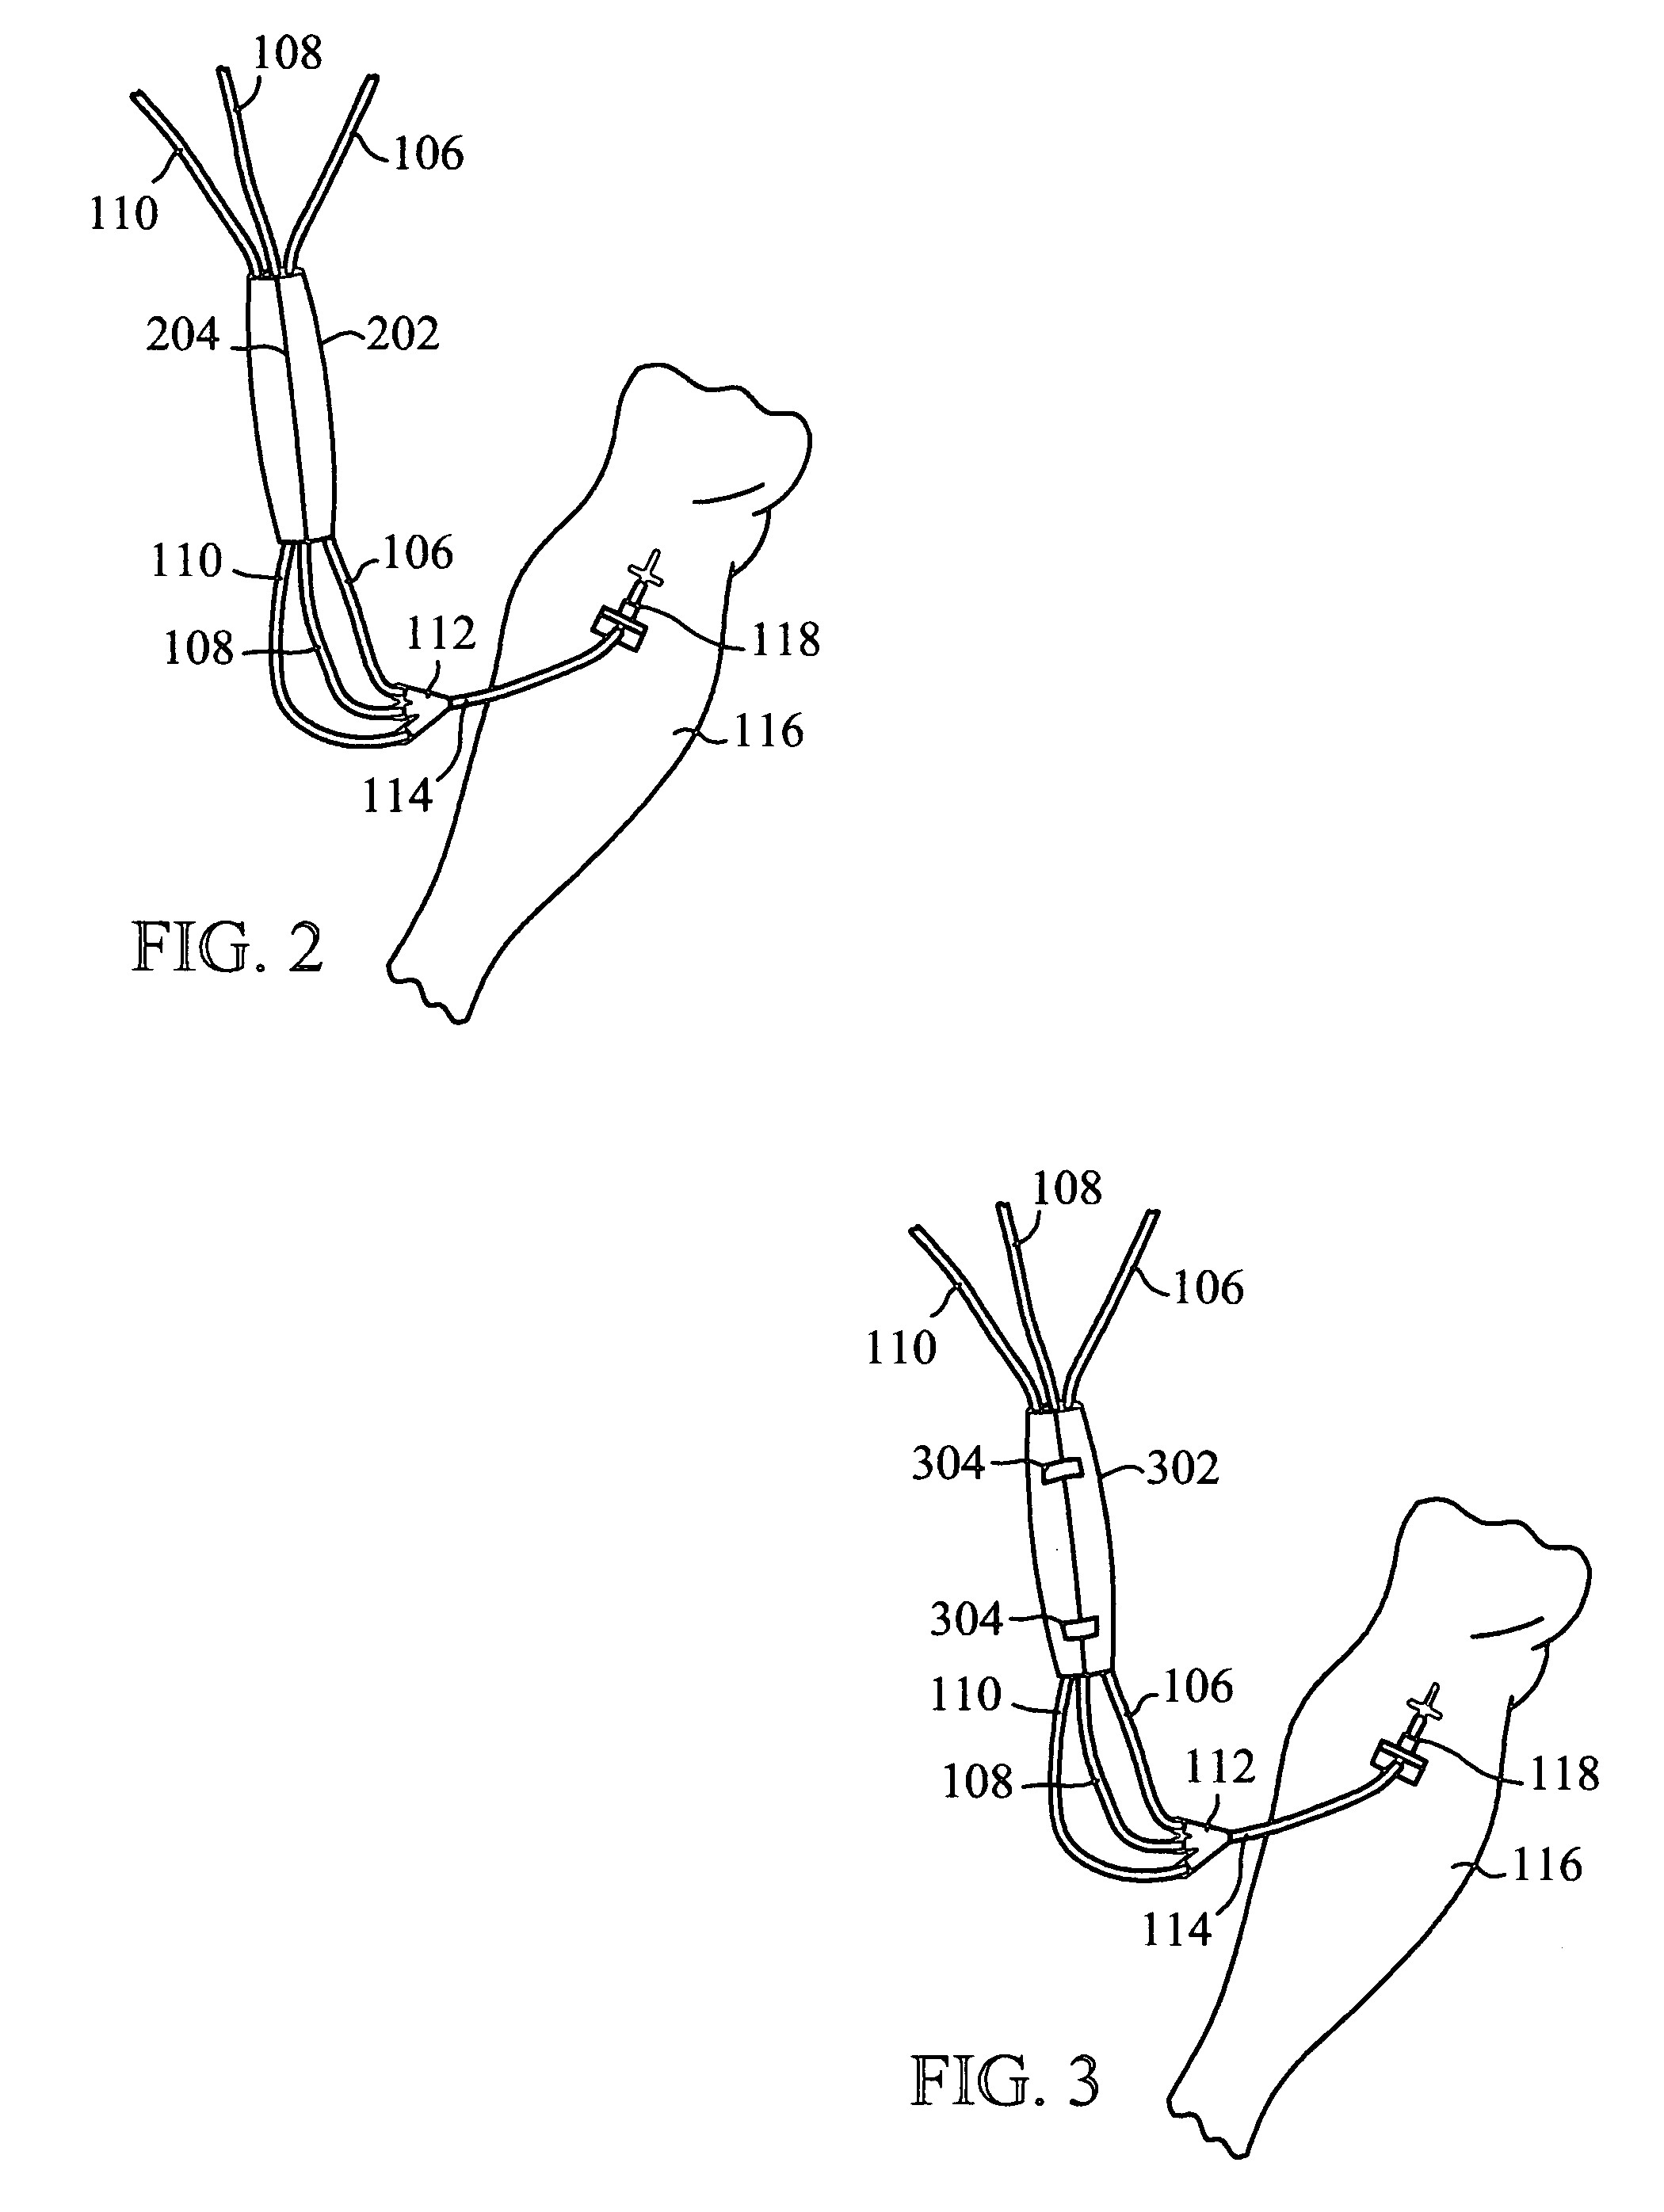 Intravenous tubing protector and support system